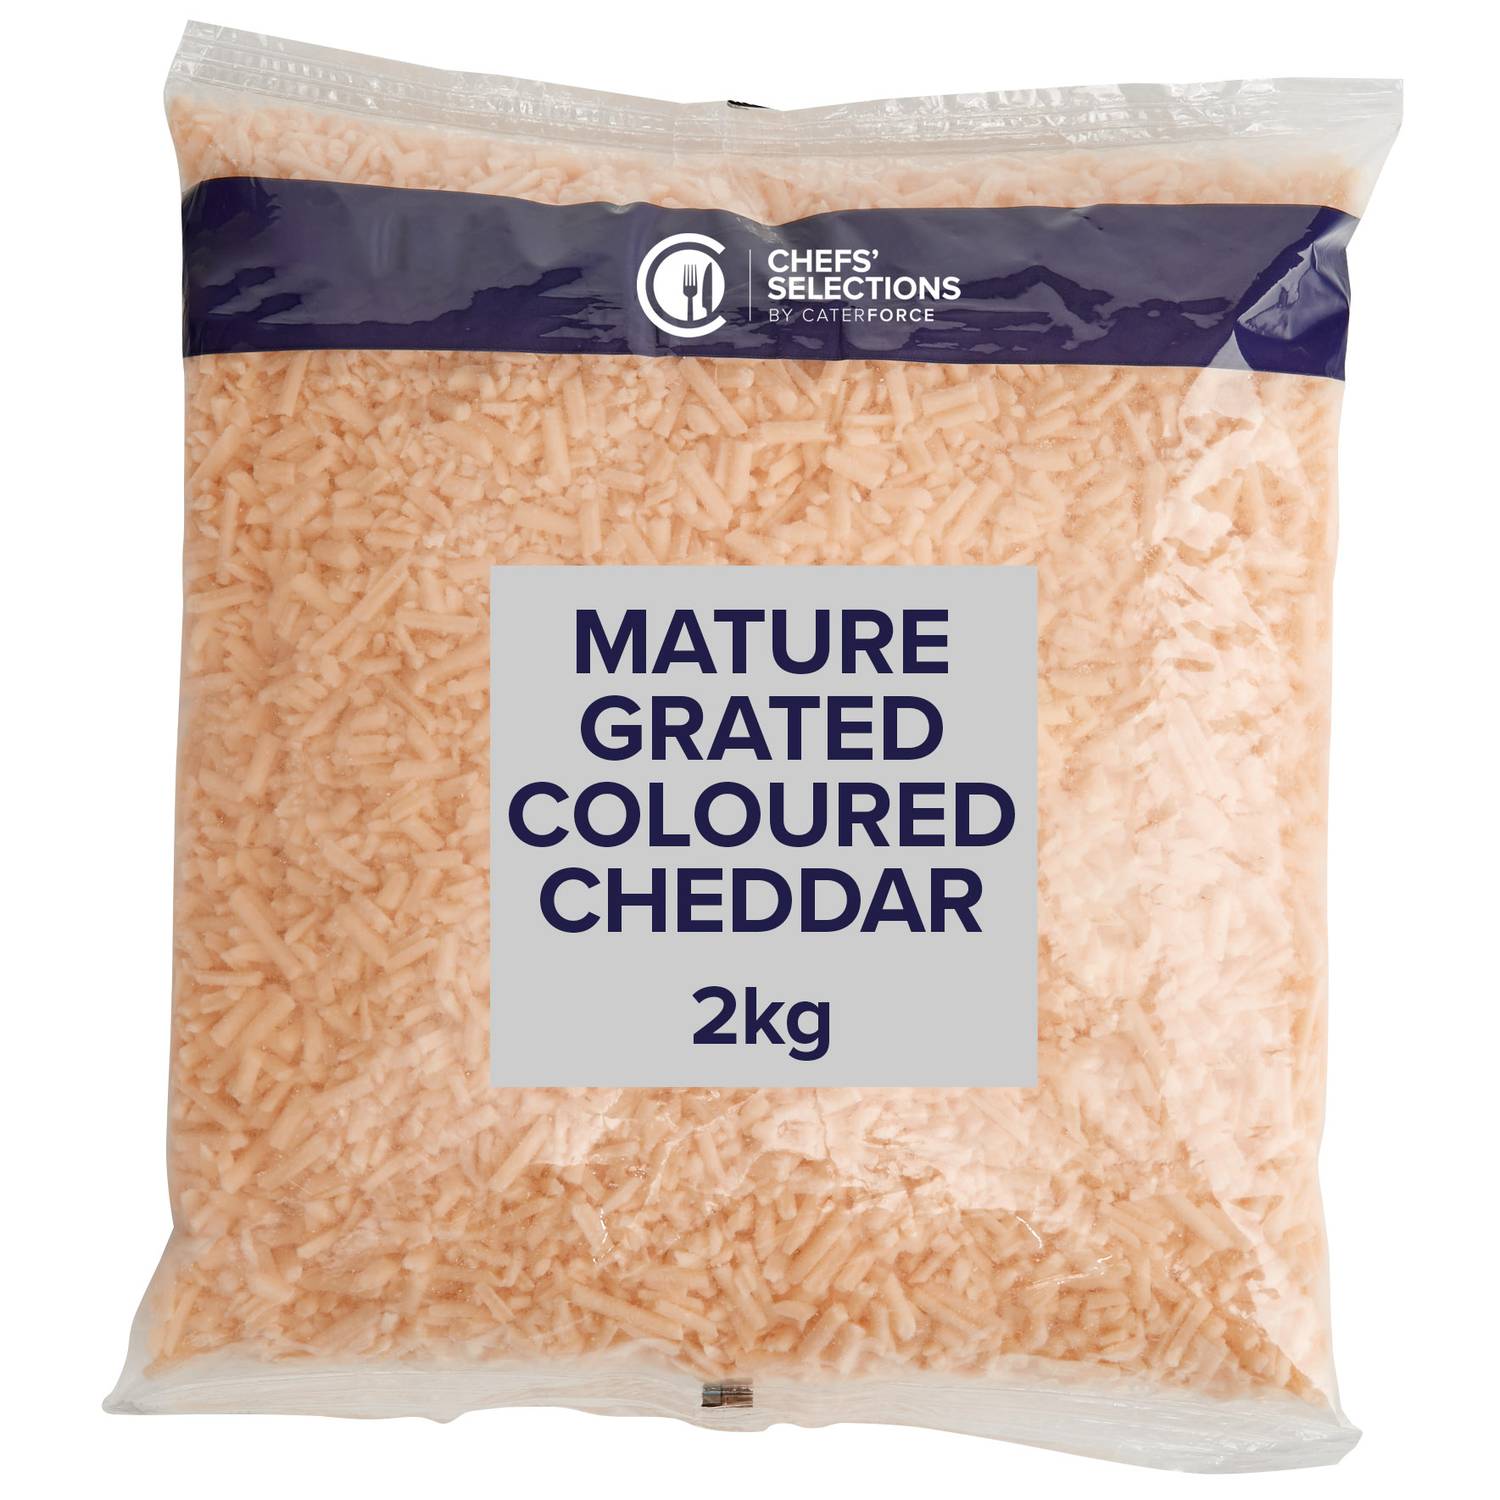 Chefs’ Selections Grated Coloured Mature Cheddar 6 x 2kg